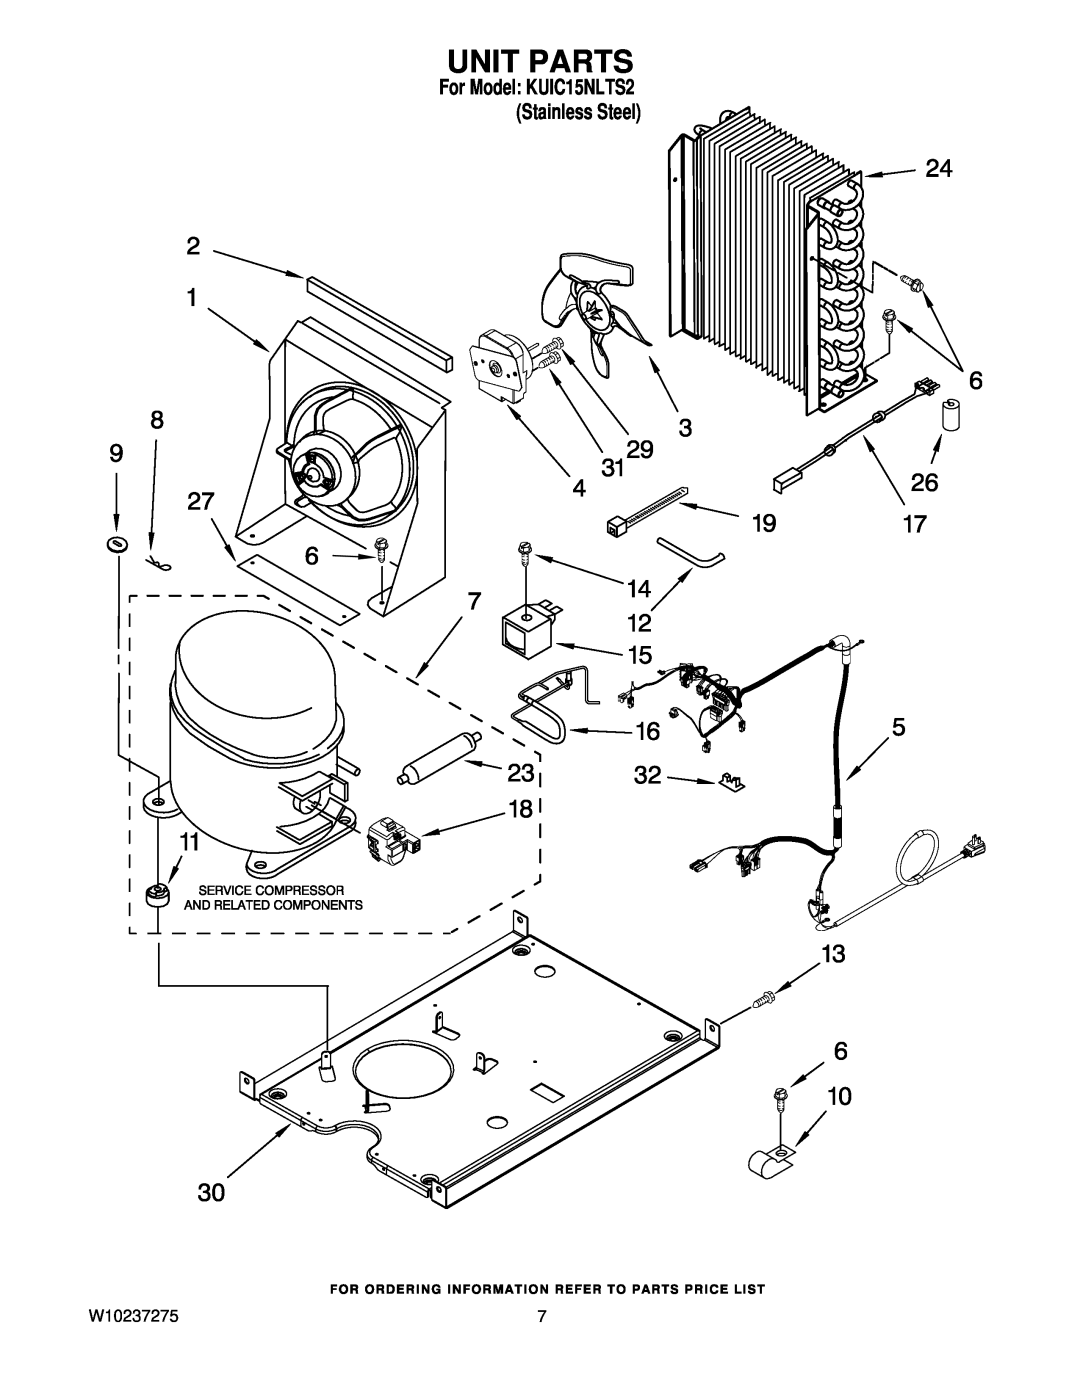 KitchenAid manual Unit Parts, W10237275, For Model KUIC15NLTS2 Stainless Steel 